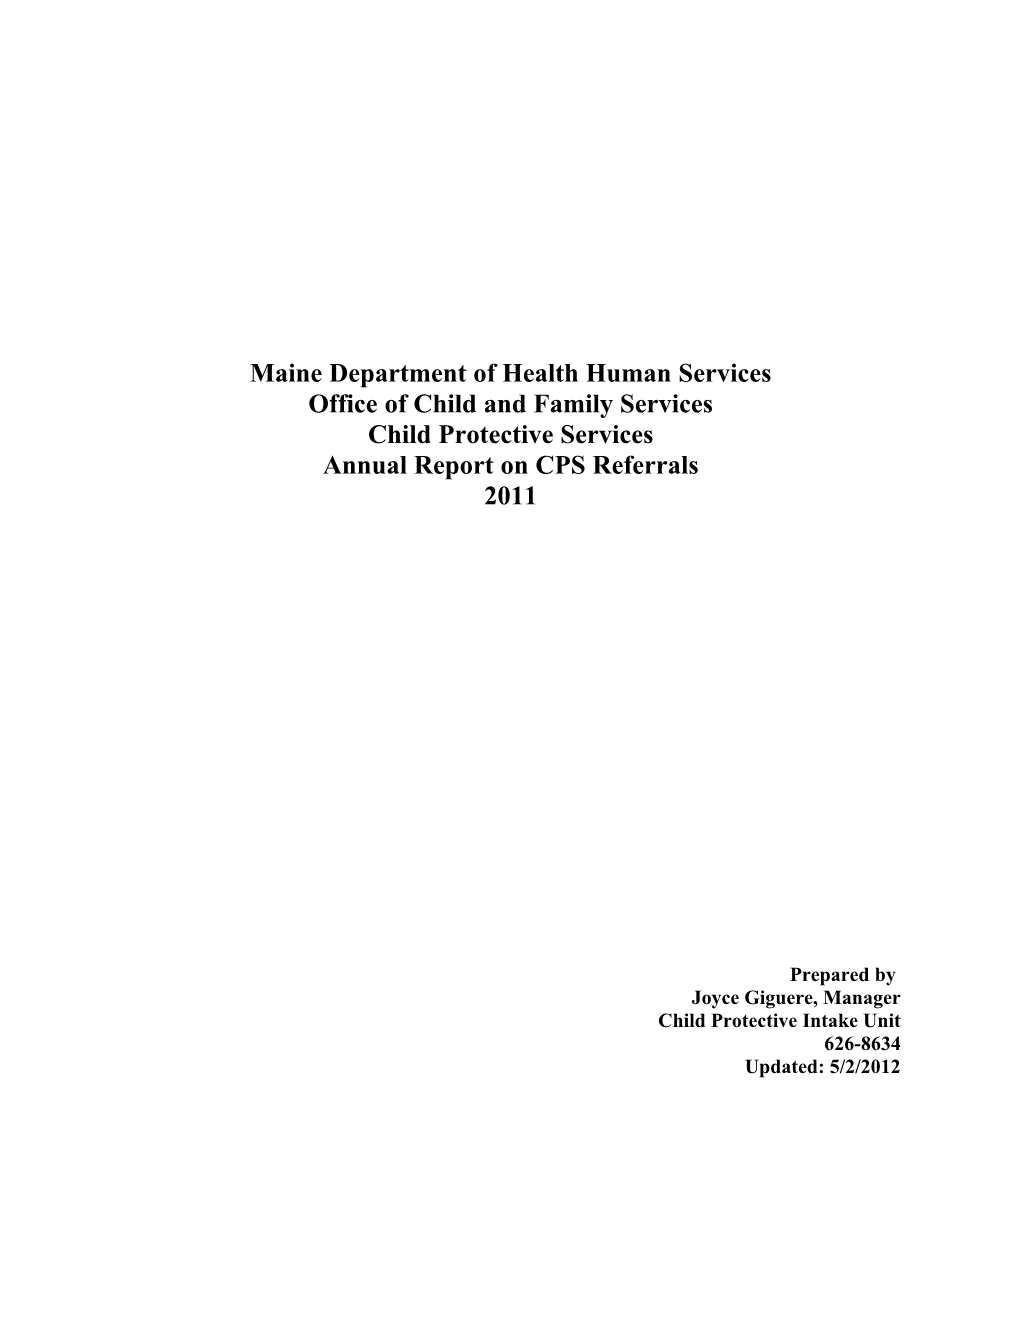 Maine Department of Human Services s1